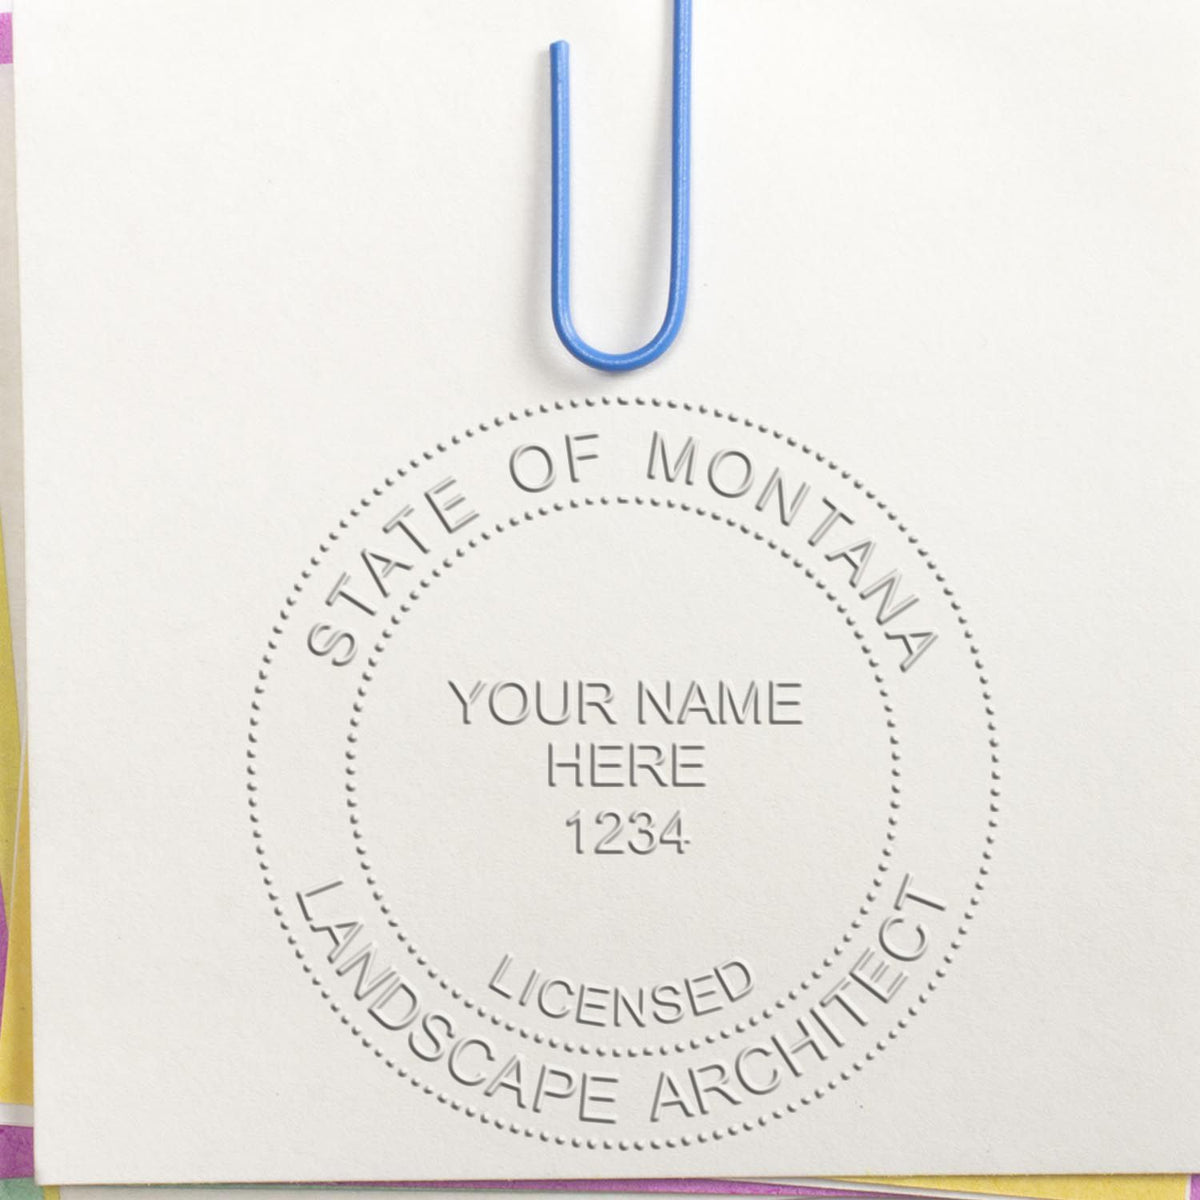 A photograph of the Hybrid Montana Landscape Architect Seal stamp impression reveals a vivid, professional image of the on paper.